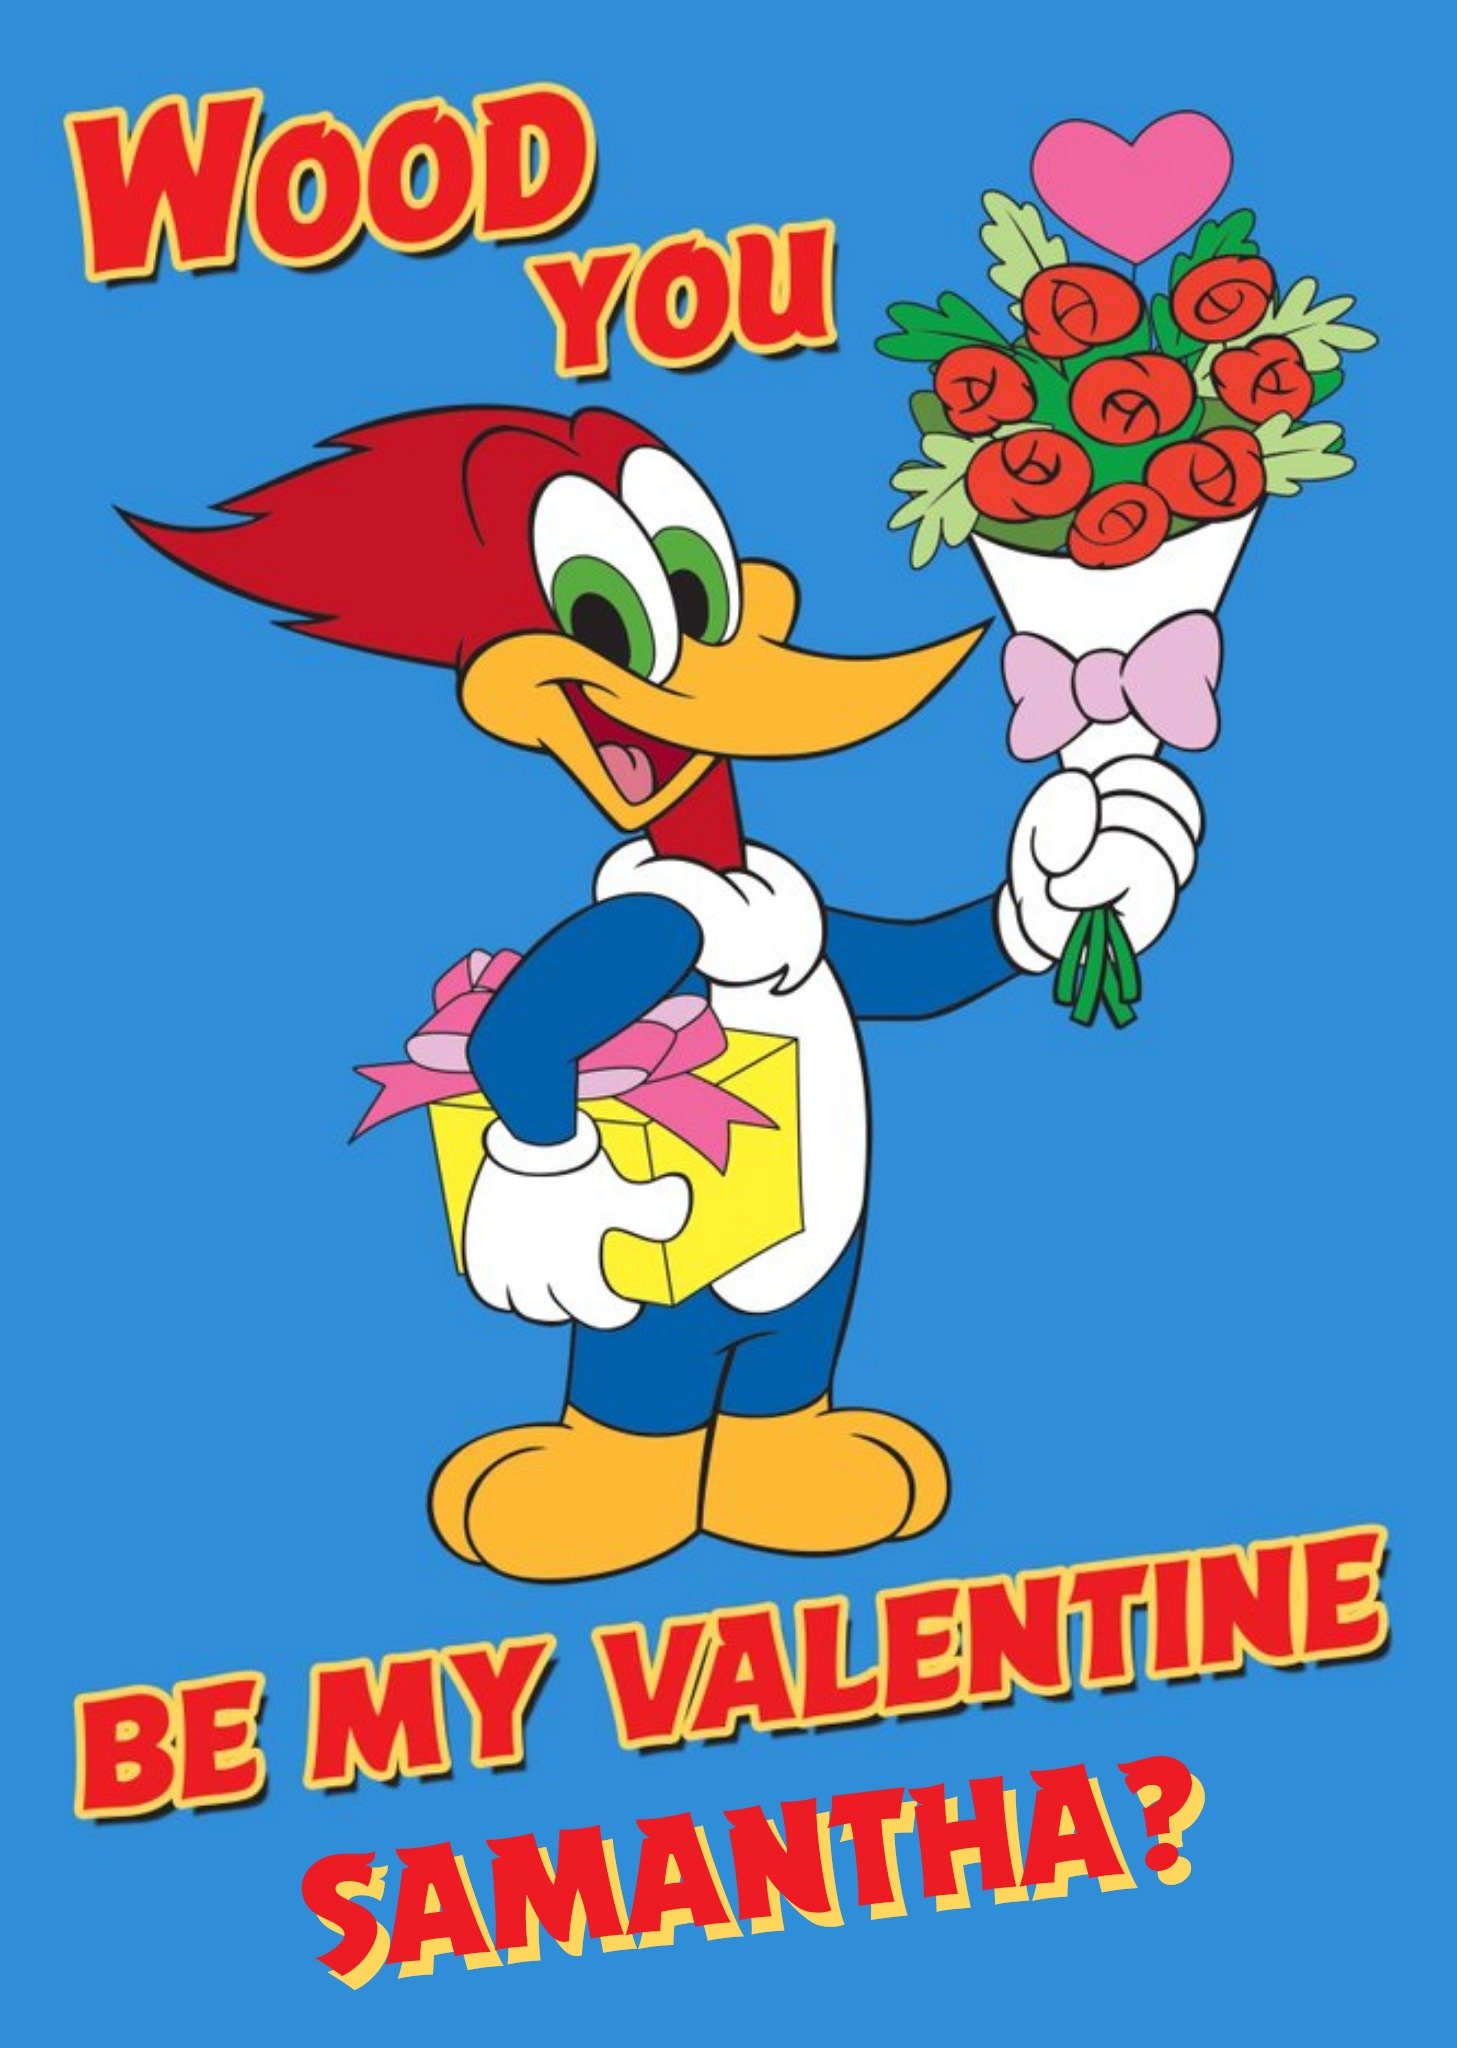 Other Universal Woody Woodpecker Wood You Be My Valentine Funny Pun Card Ecard